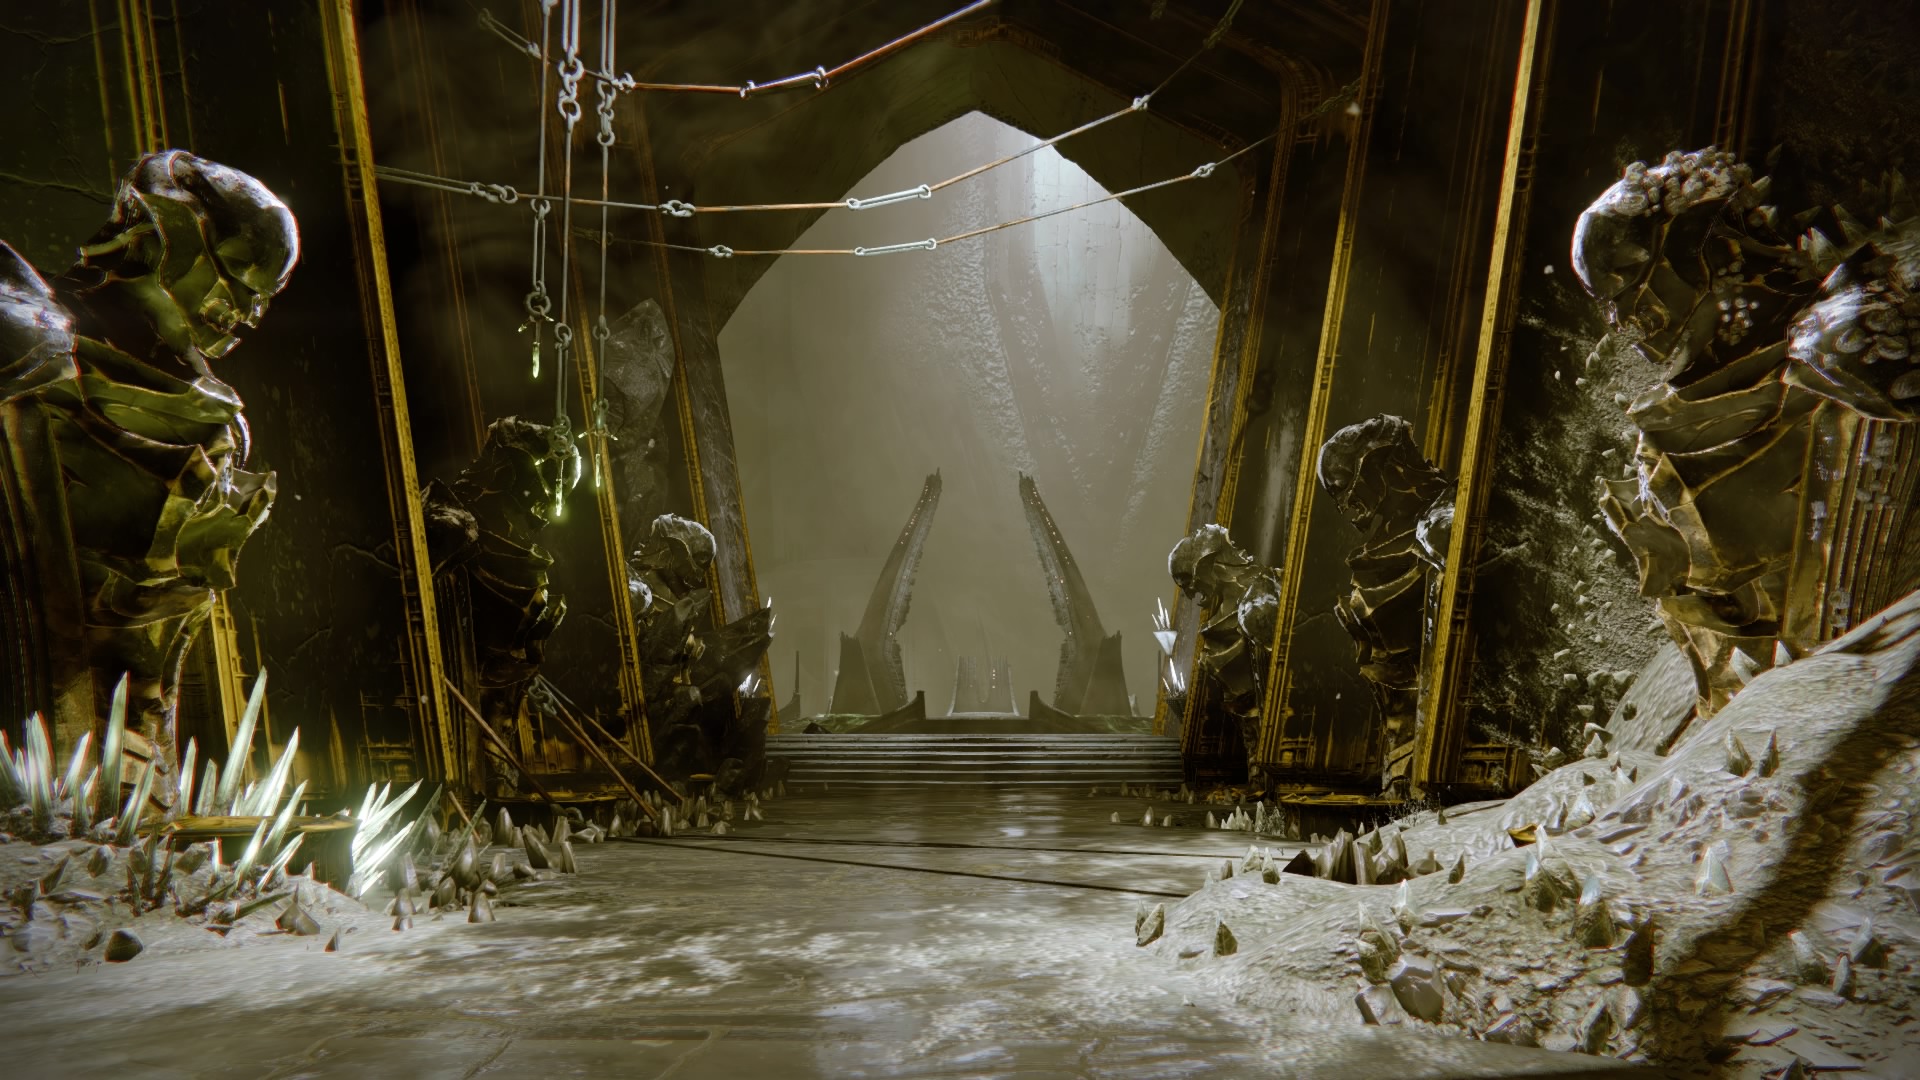 The Court of Oryx.